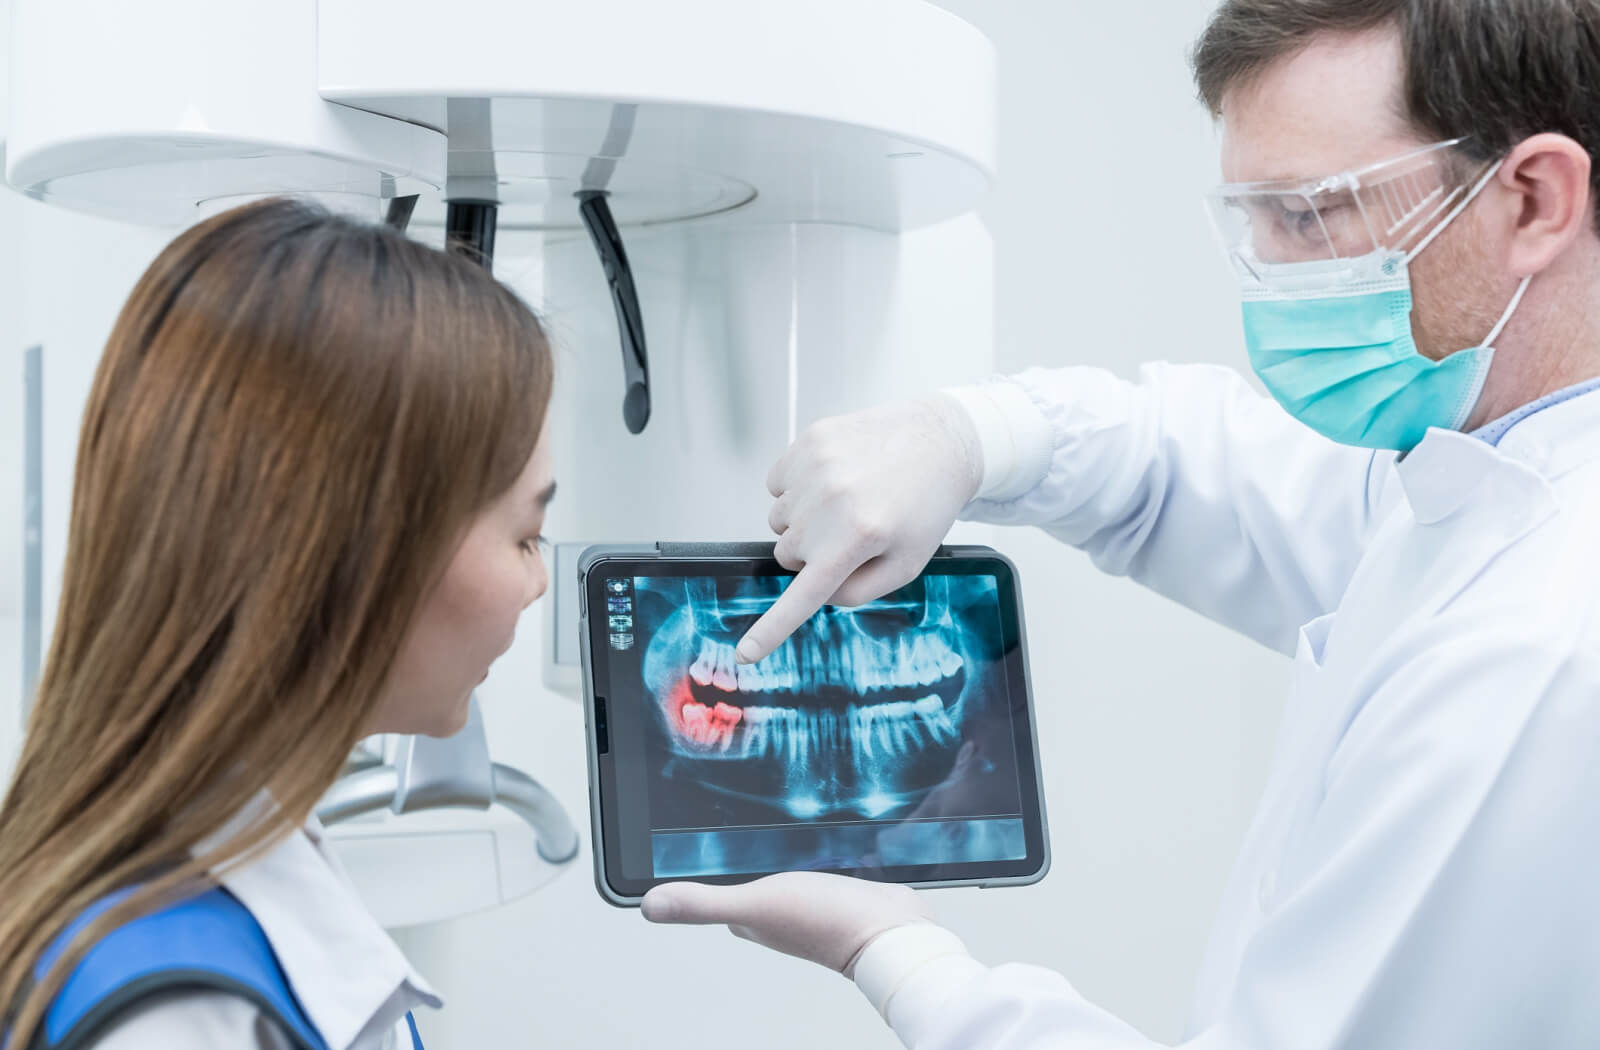 A male dentist explaining a dental procedure to a woman while holding a dental X-ray image.
